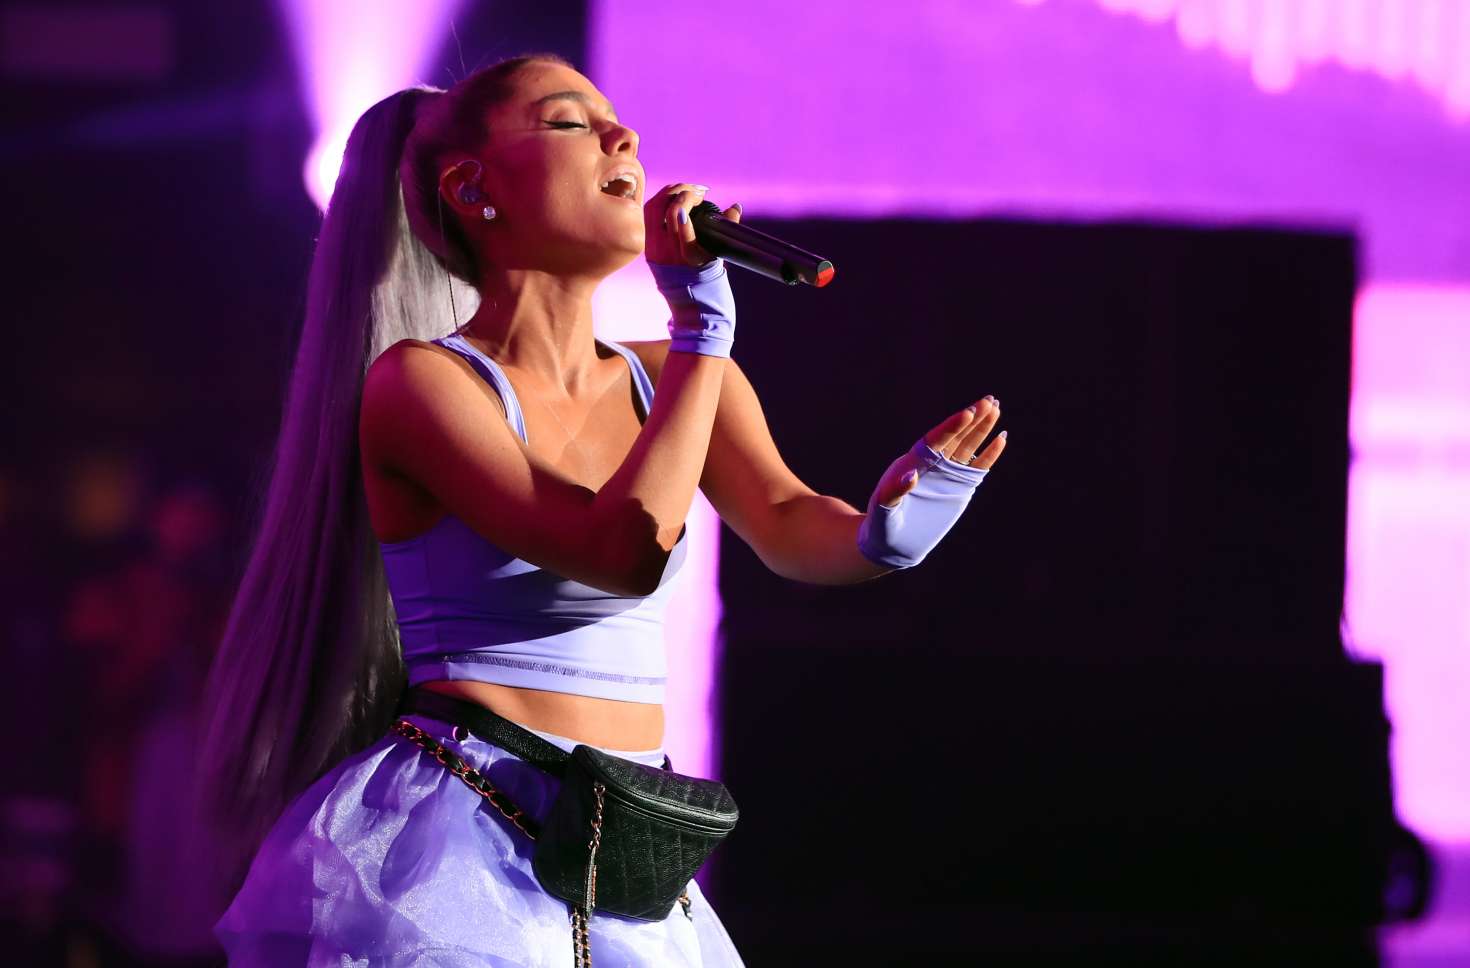 Ariana Grande â€“ Performs at 2018 Coachella Valley Music And Arts Festival in Indio